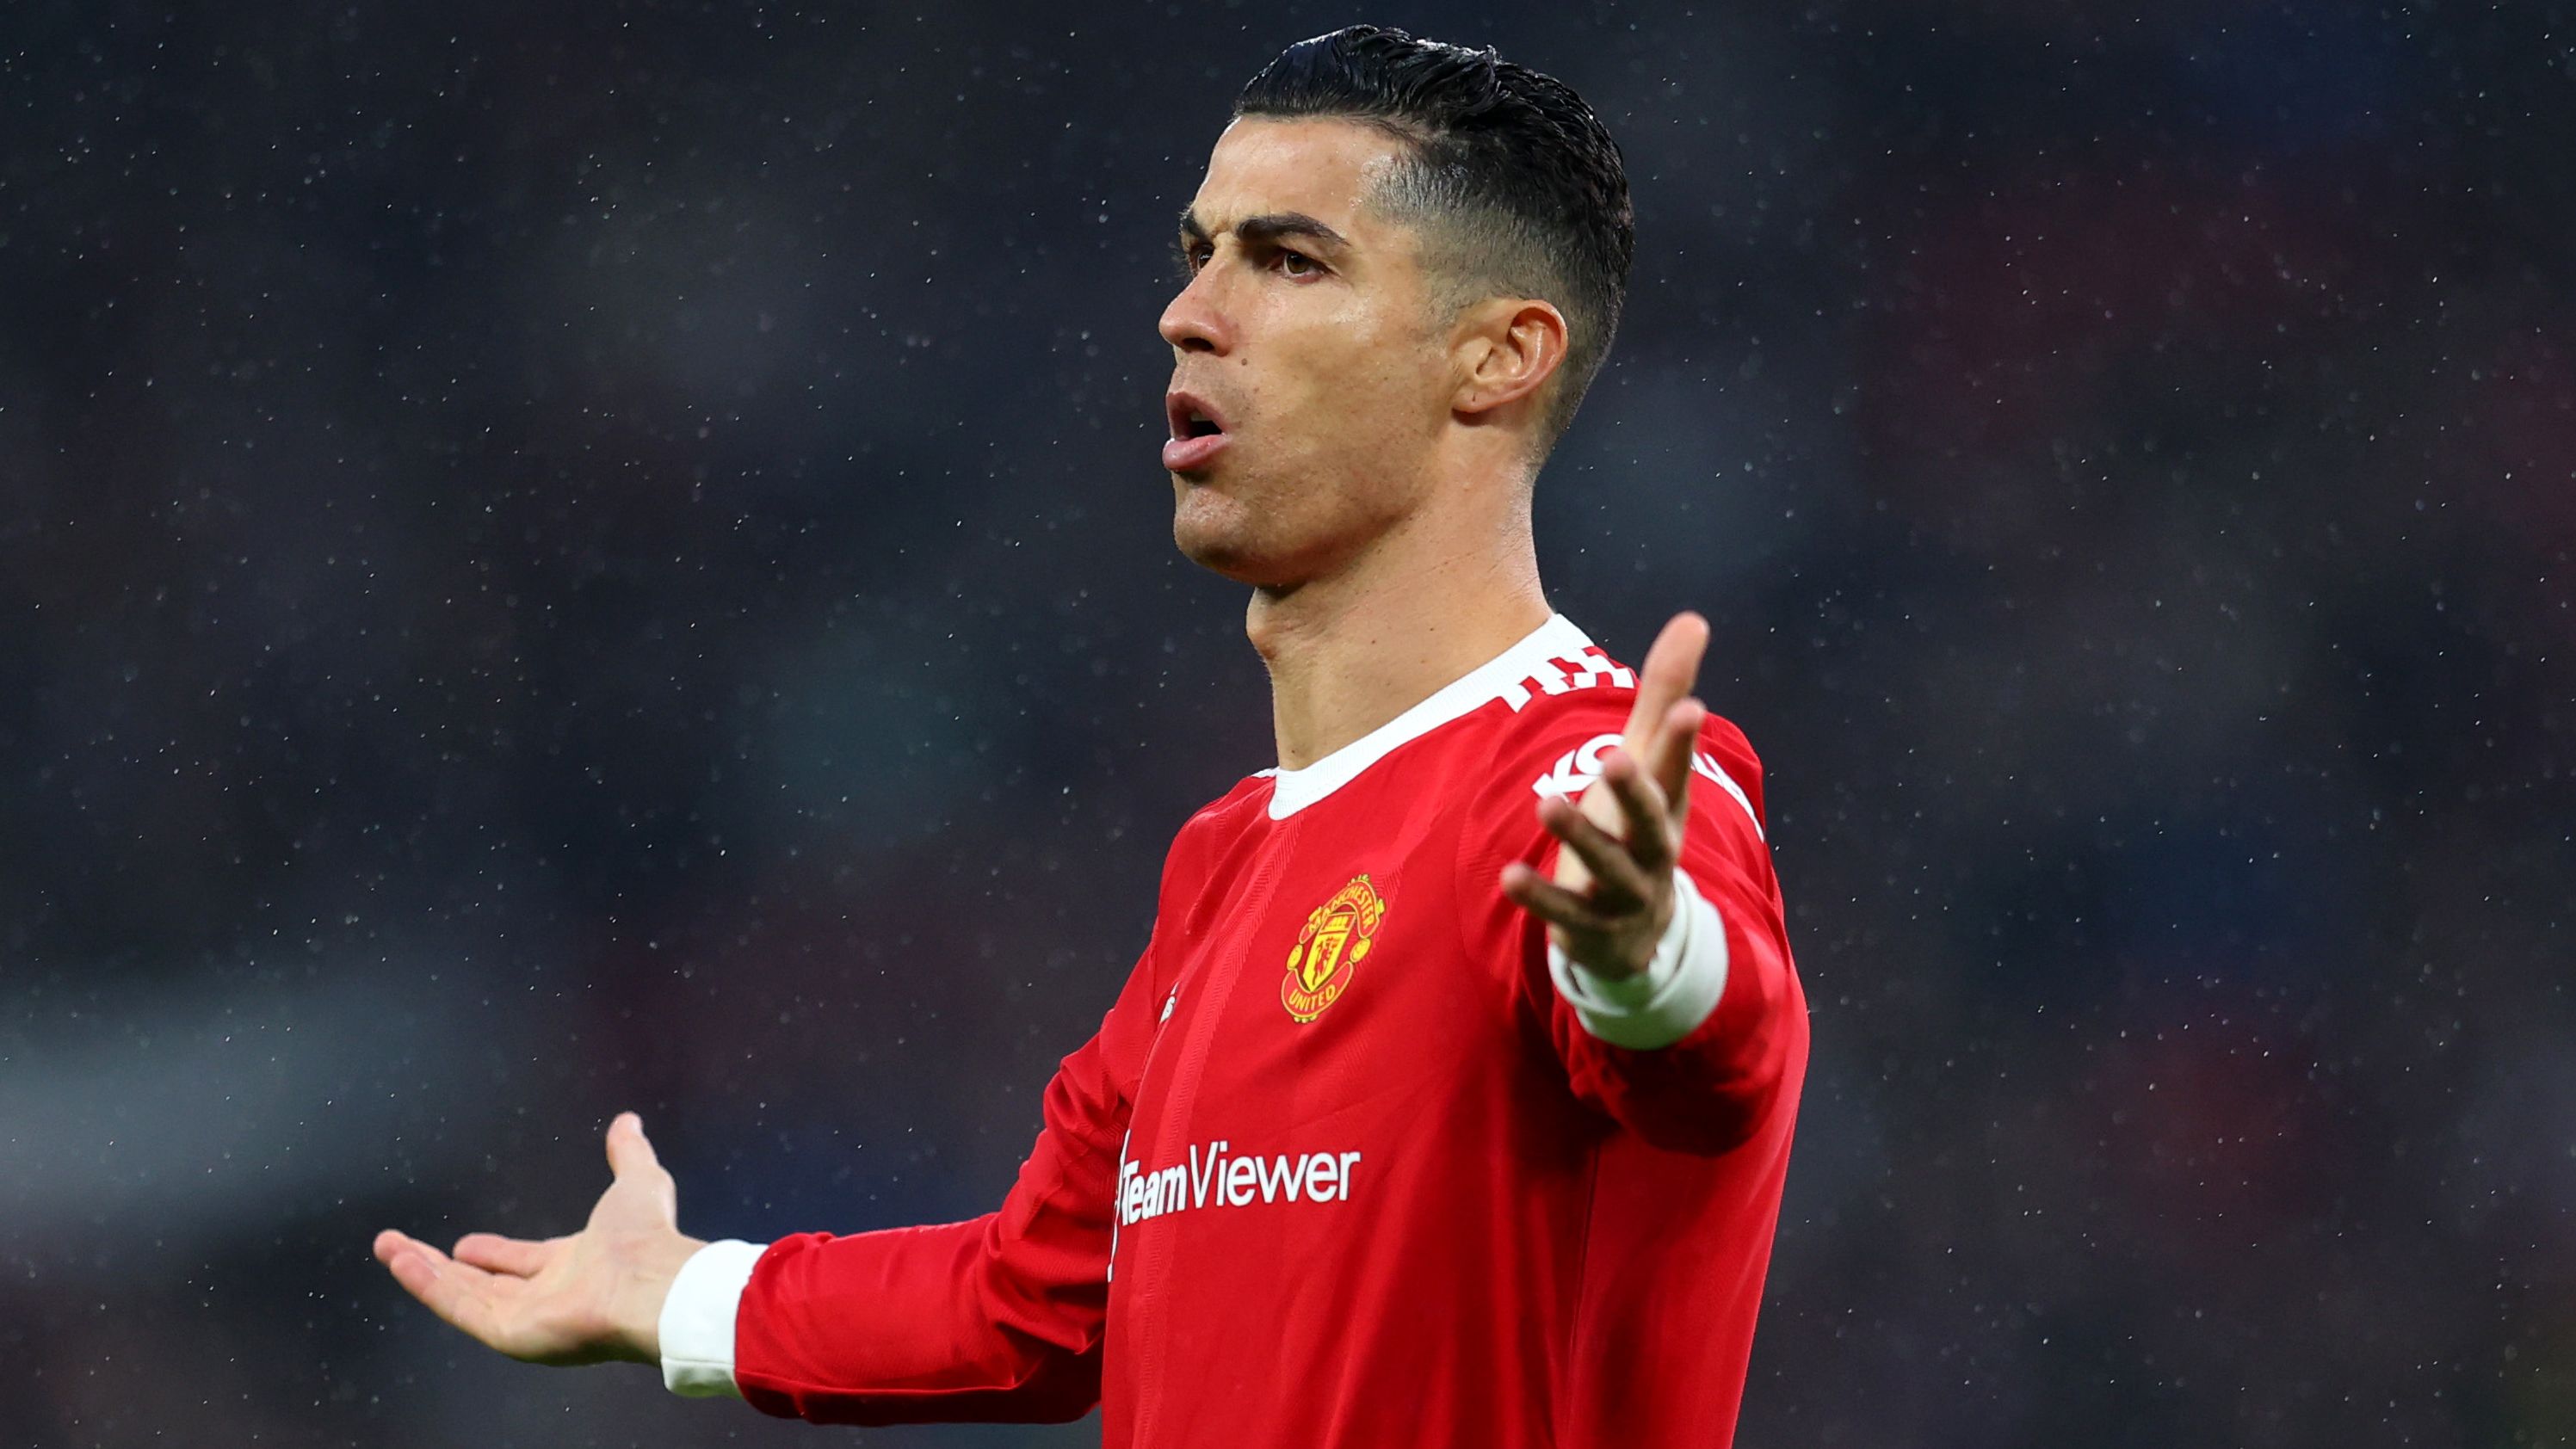 Cristiano Ronaldo reportedly wants to play in the Champions League next season.